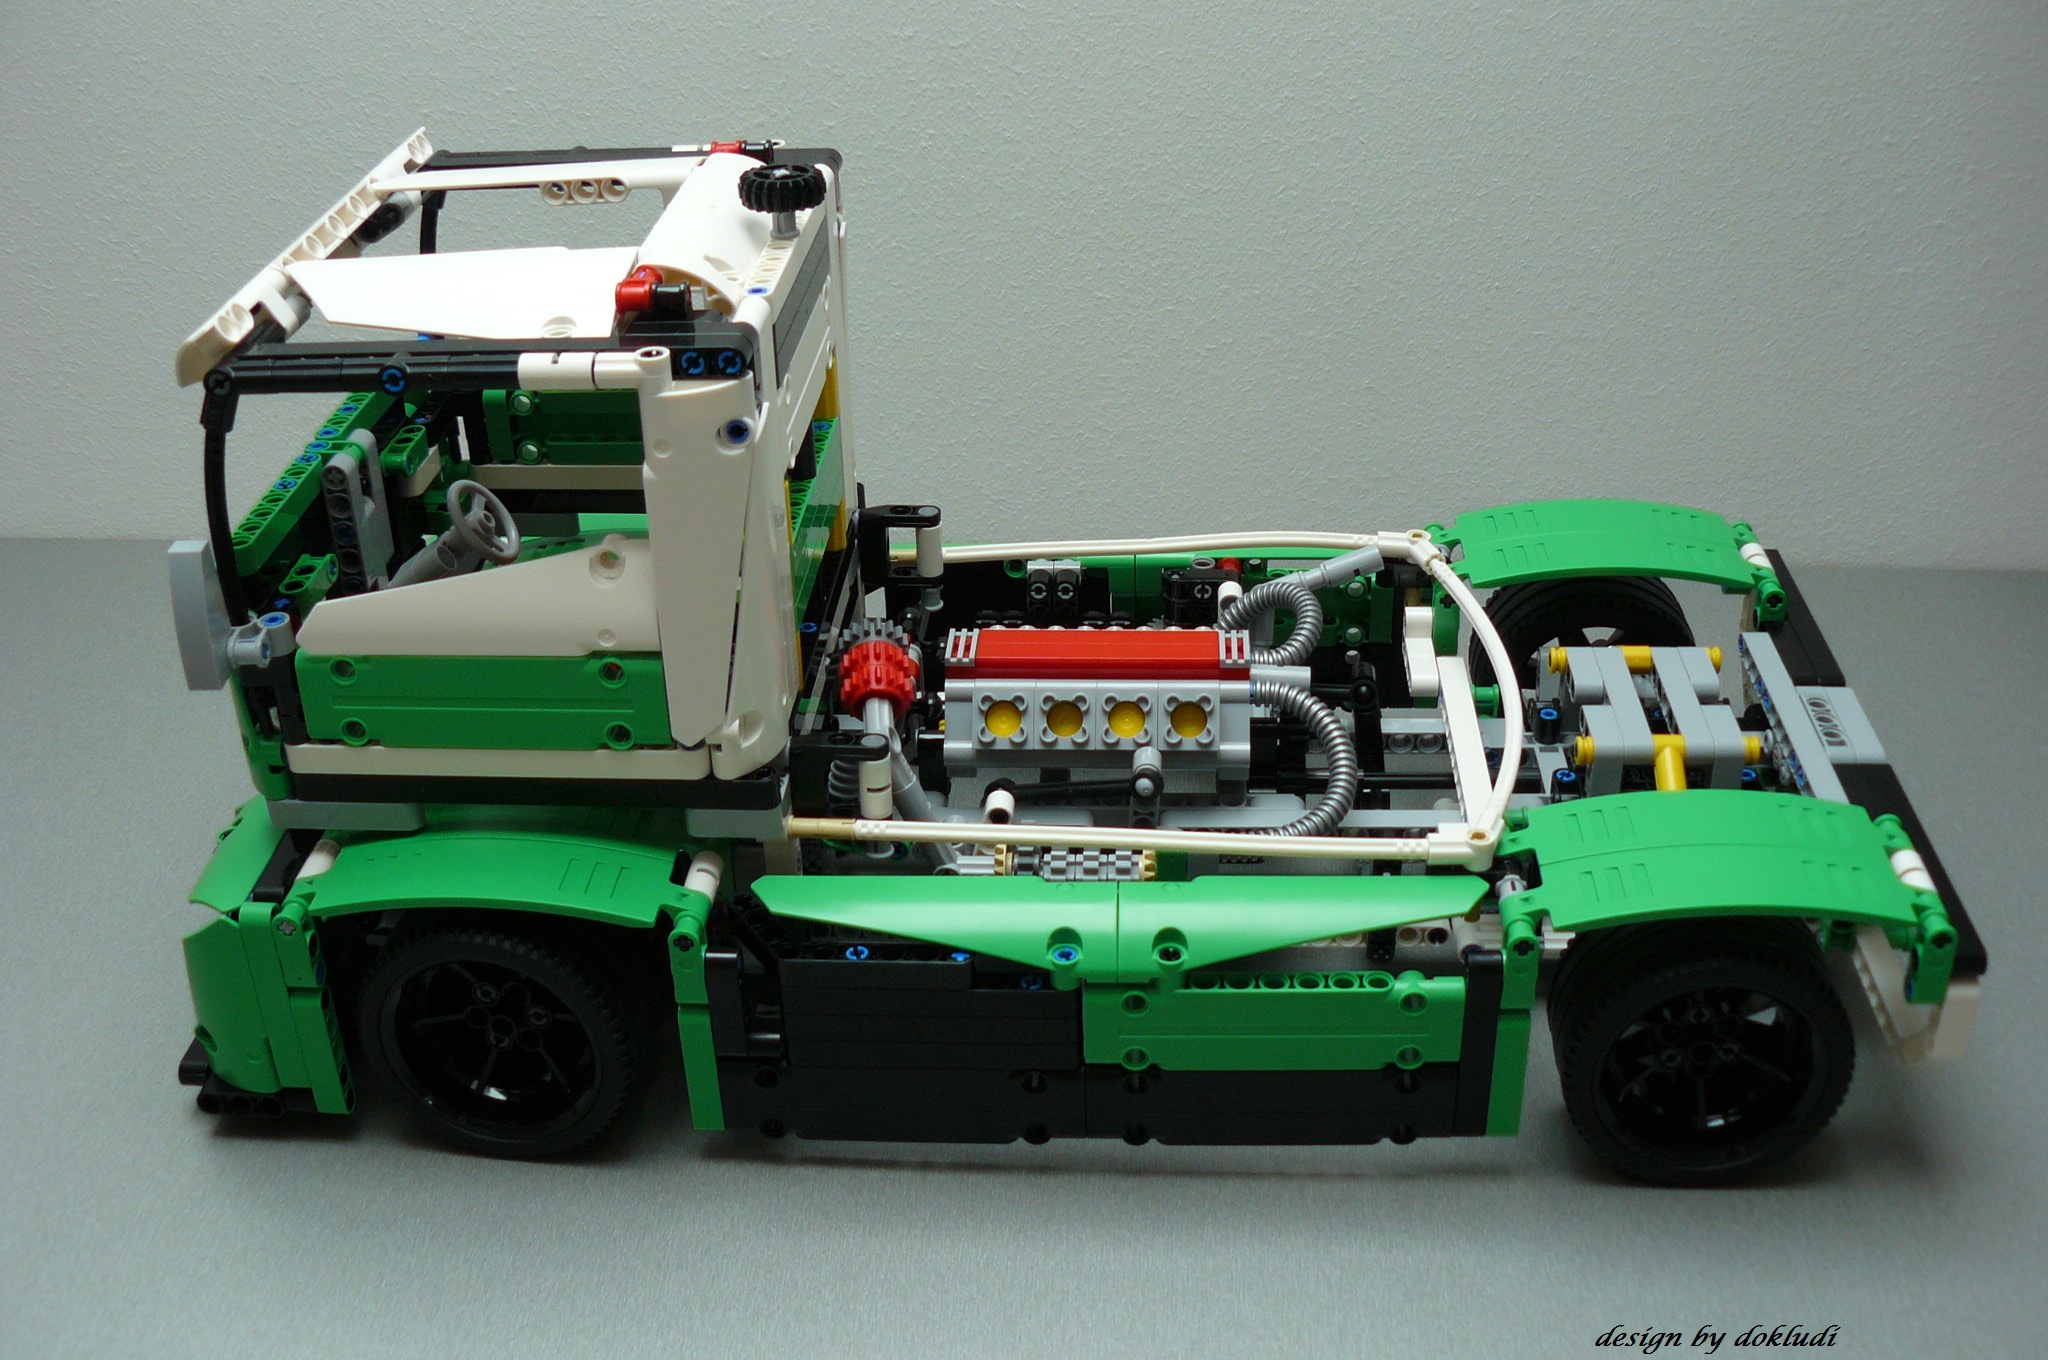 LEGO MOC Lego 42039 "C" Modell - Race Truck - THE BEAST | Rebrickable - with LEGO